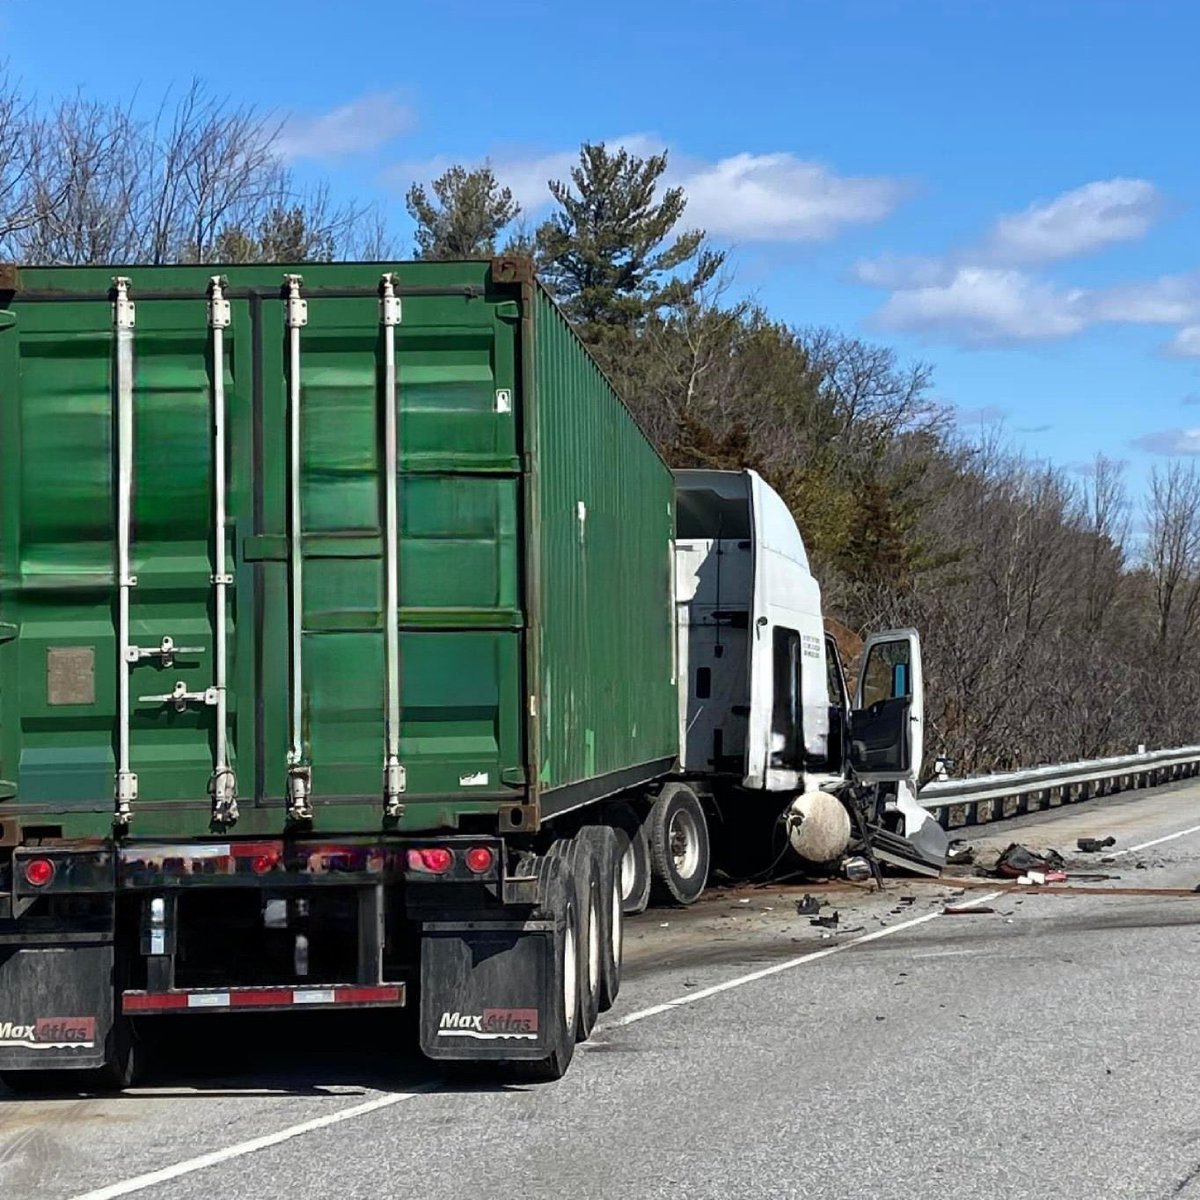 Ontario provincial police say Lone female driver sustained life-threatening injuries after having been struck head-on by this transport truck yesterday, April 7th, 2023, on HWY401 in LeedsOPP area.